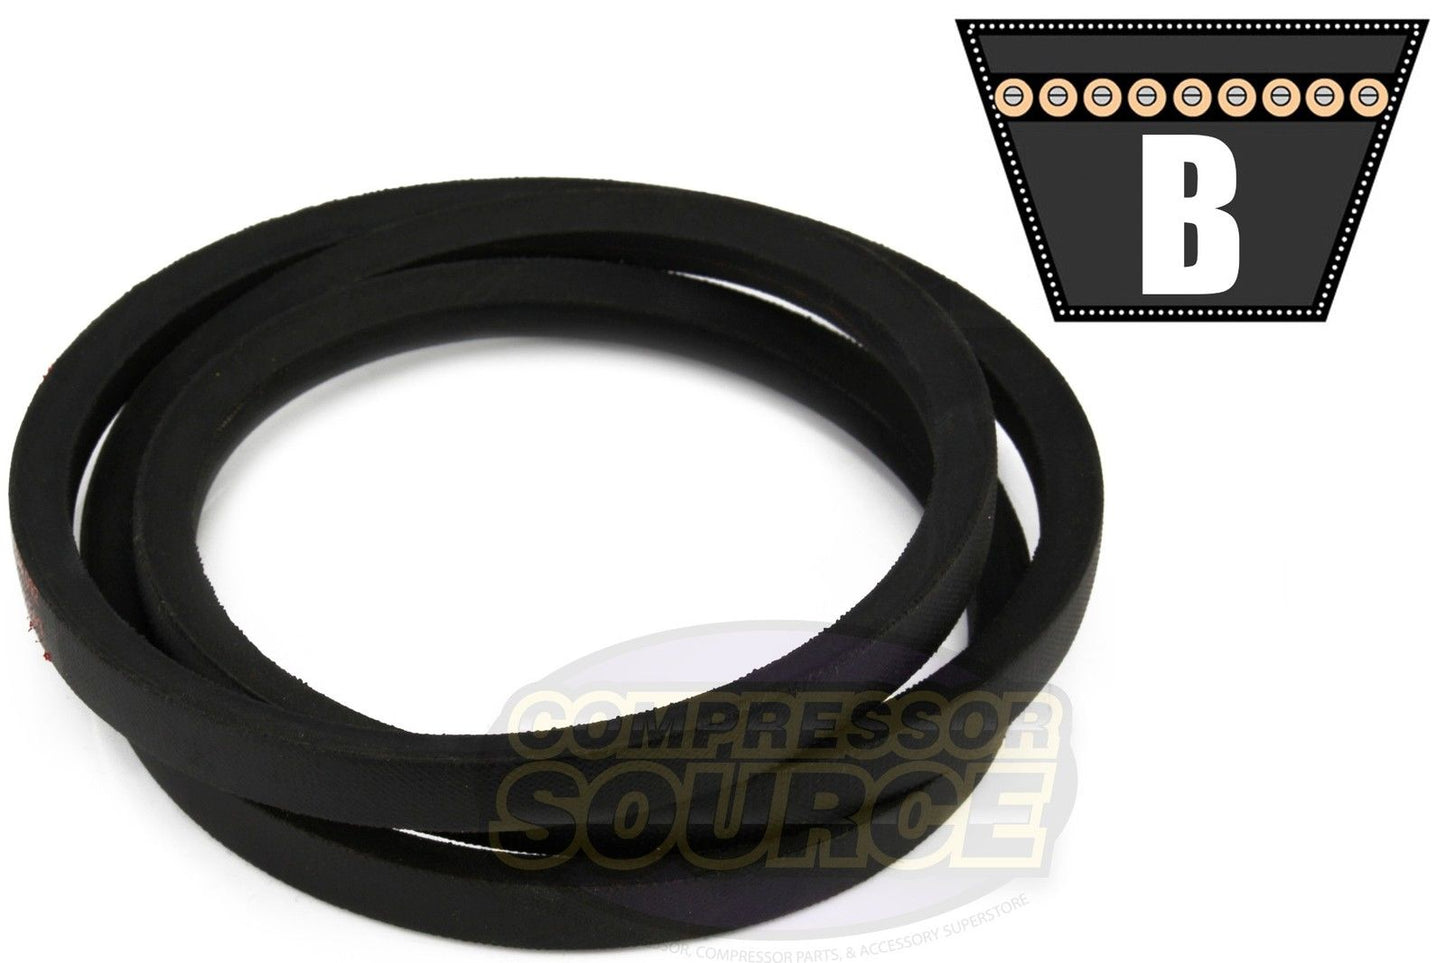 B63 Replacement High Quality Industrial & Lawn Mower 5/8" x 66"  V Belt 5L660